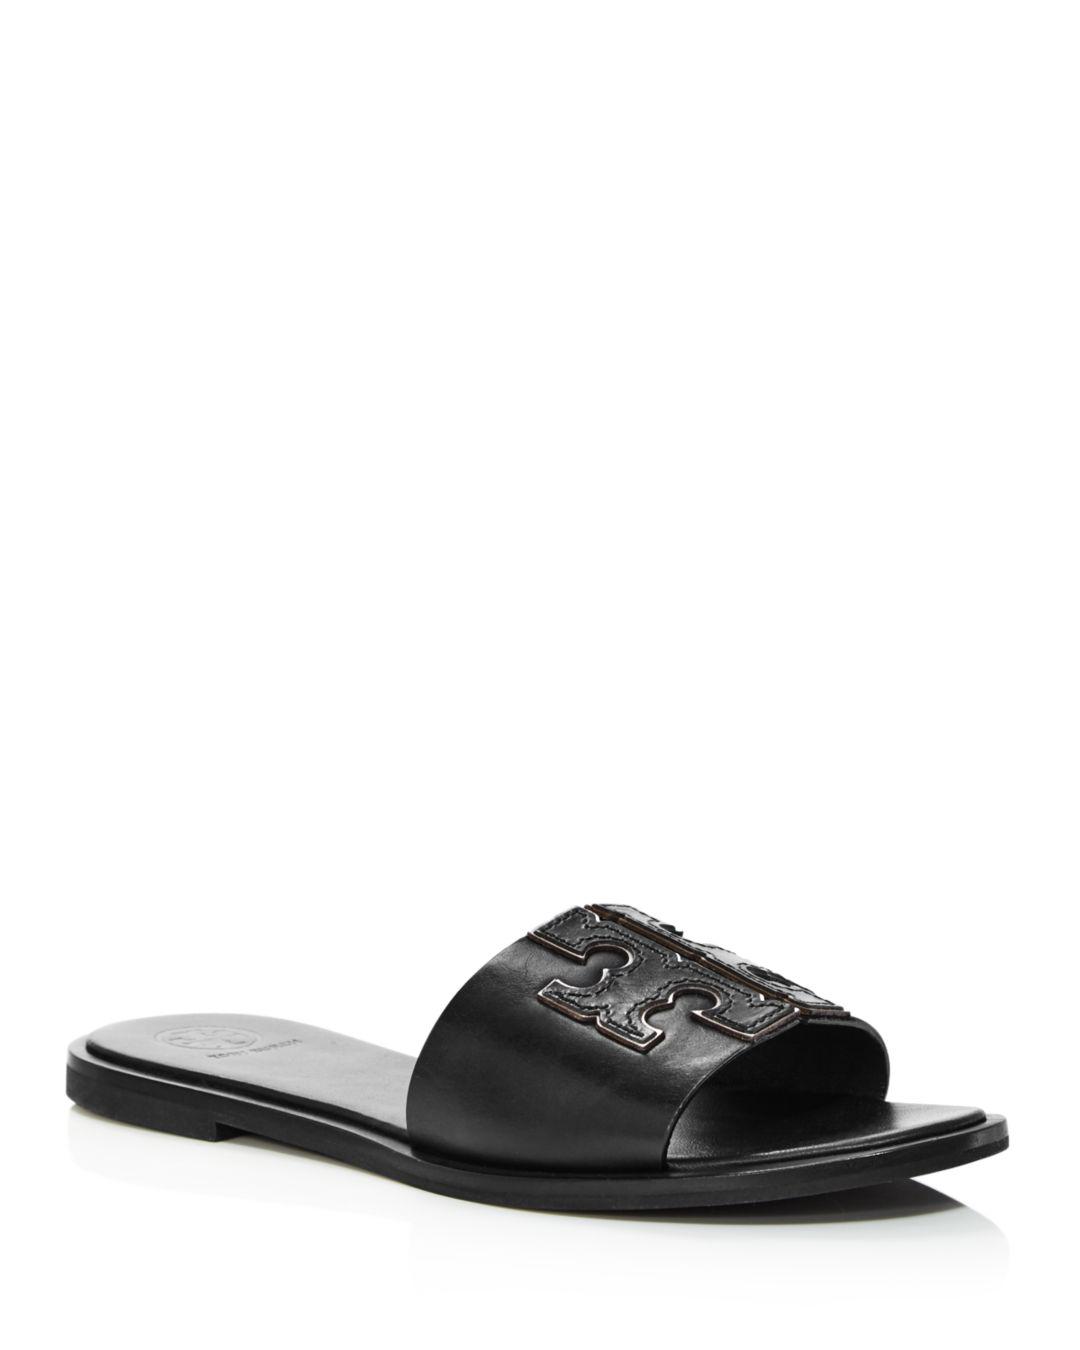 Tory Burch Leather Ines Flat Slide Sandals in Black/Silver (Black ...